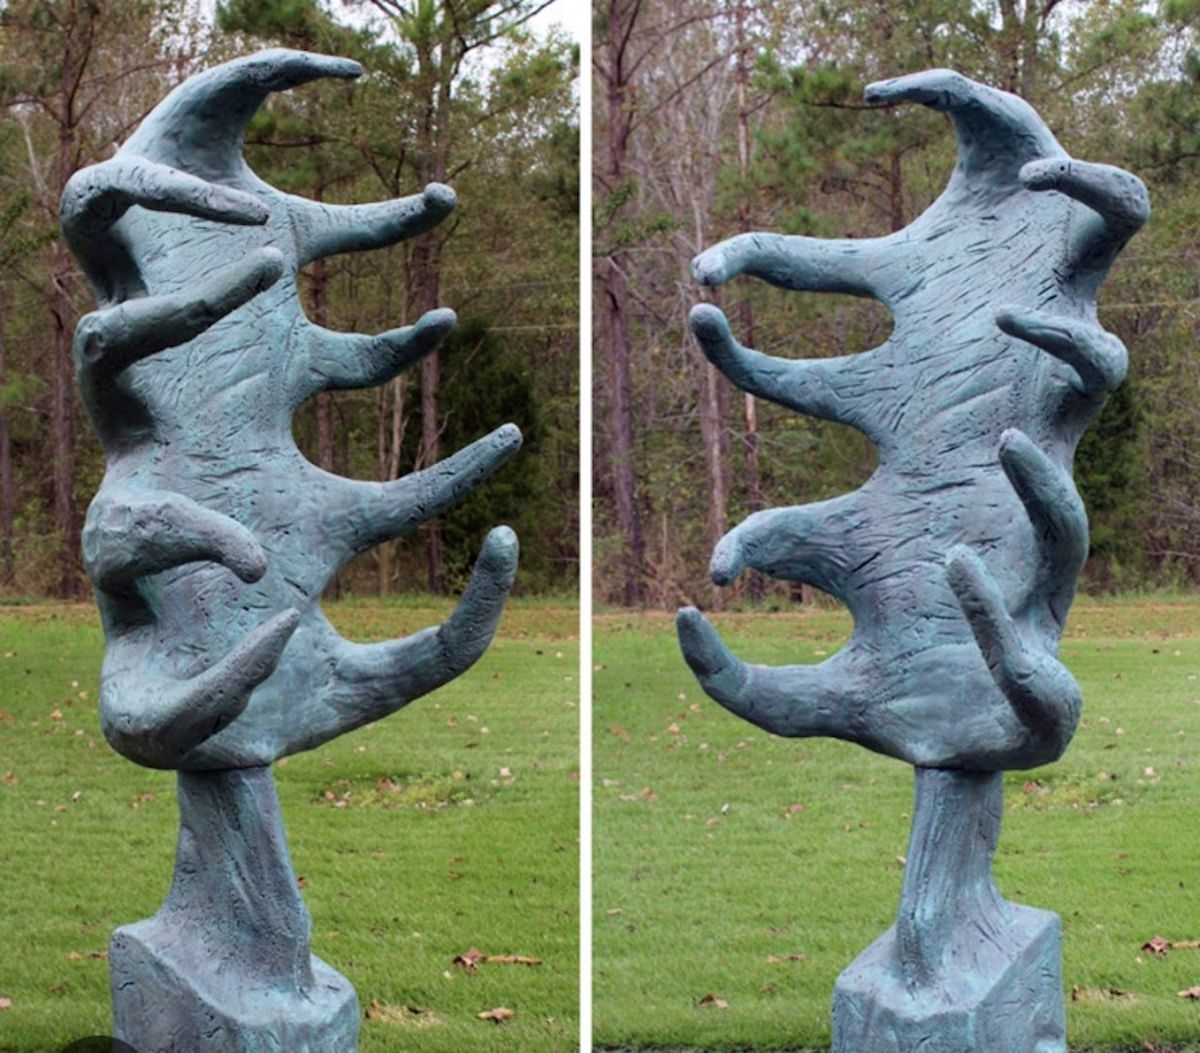 The sculpture stolen from the set of Beetlejuice 2 in Vermont Courtesy Vermont State Police